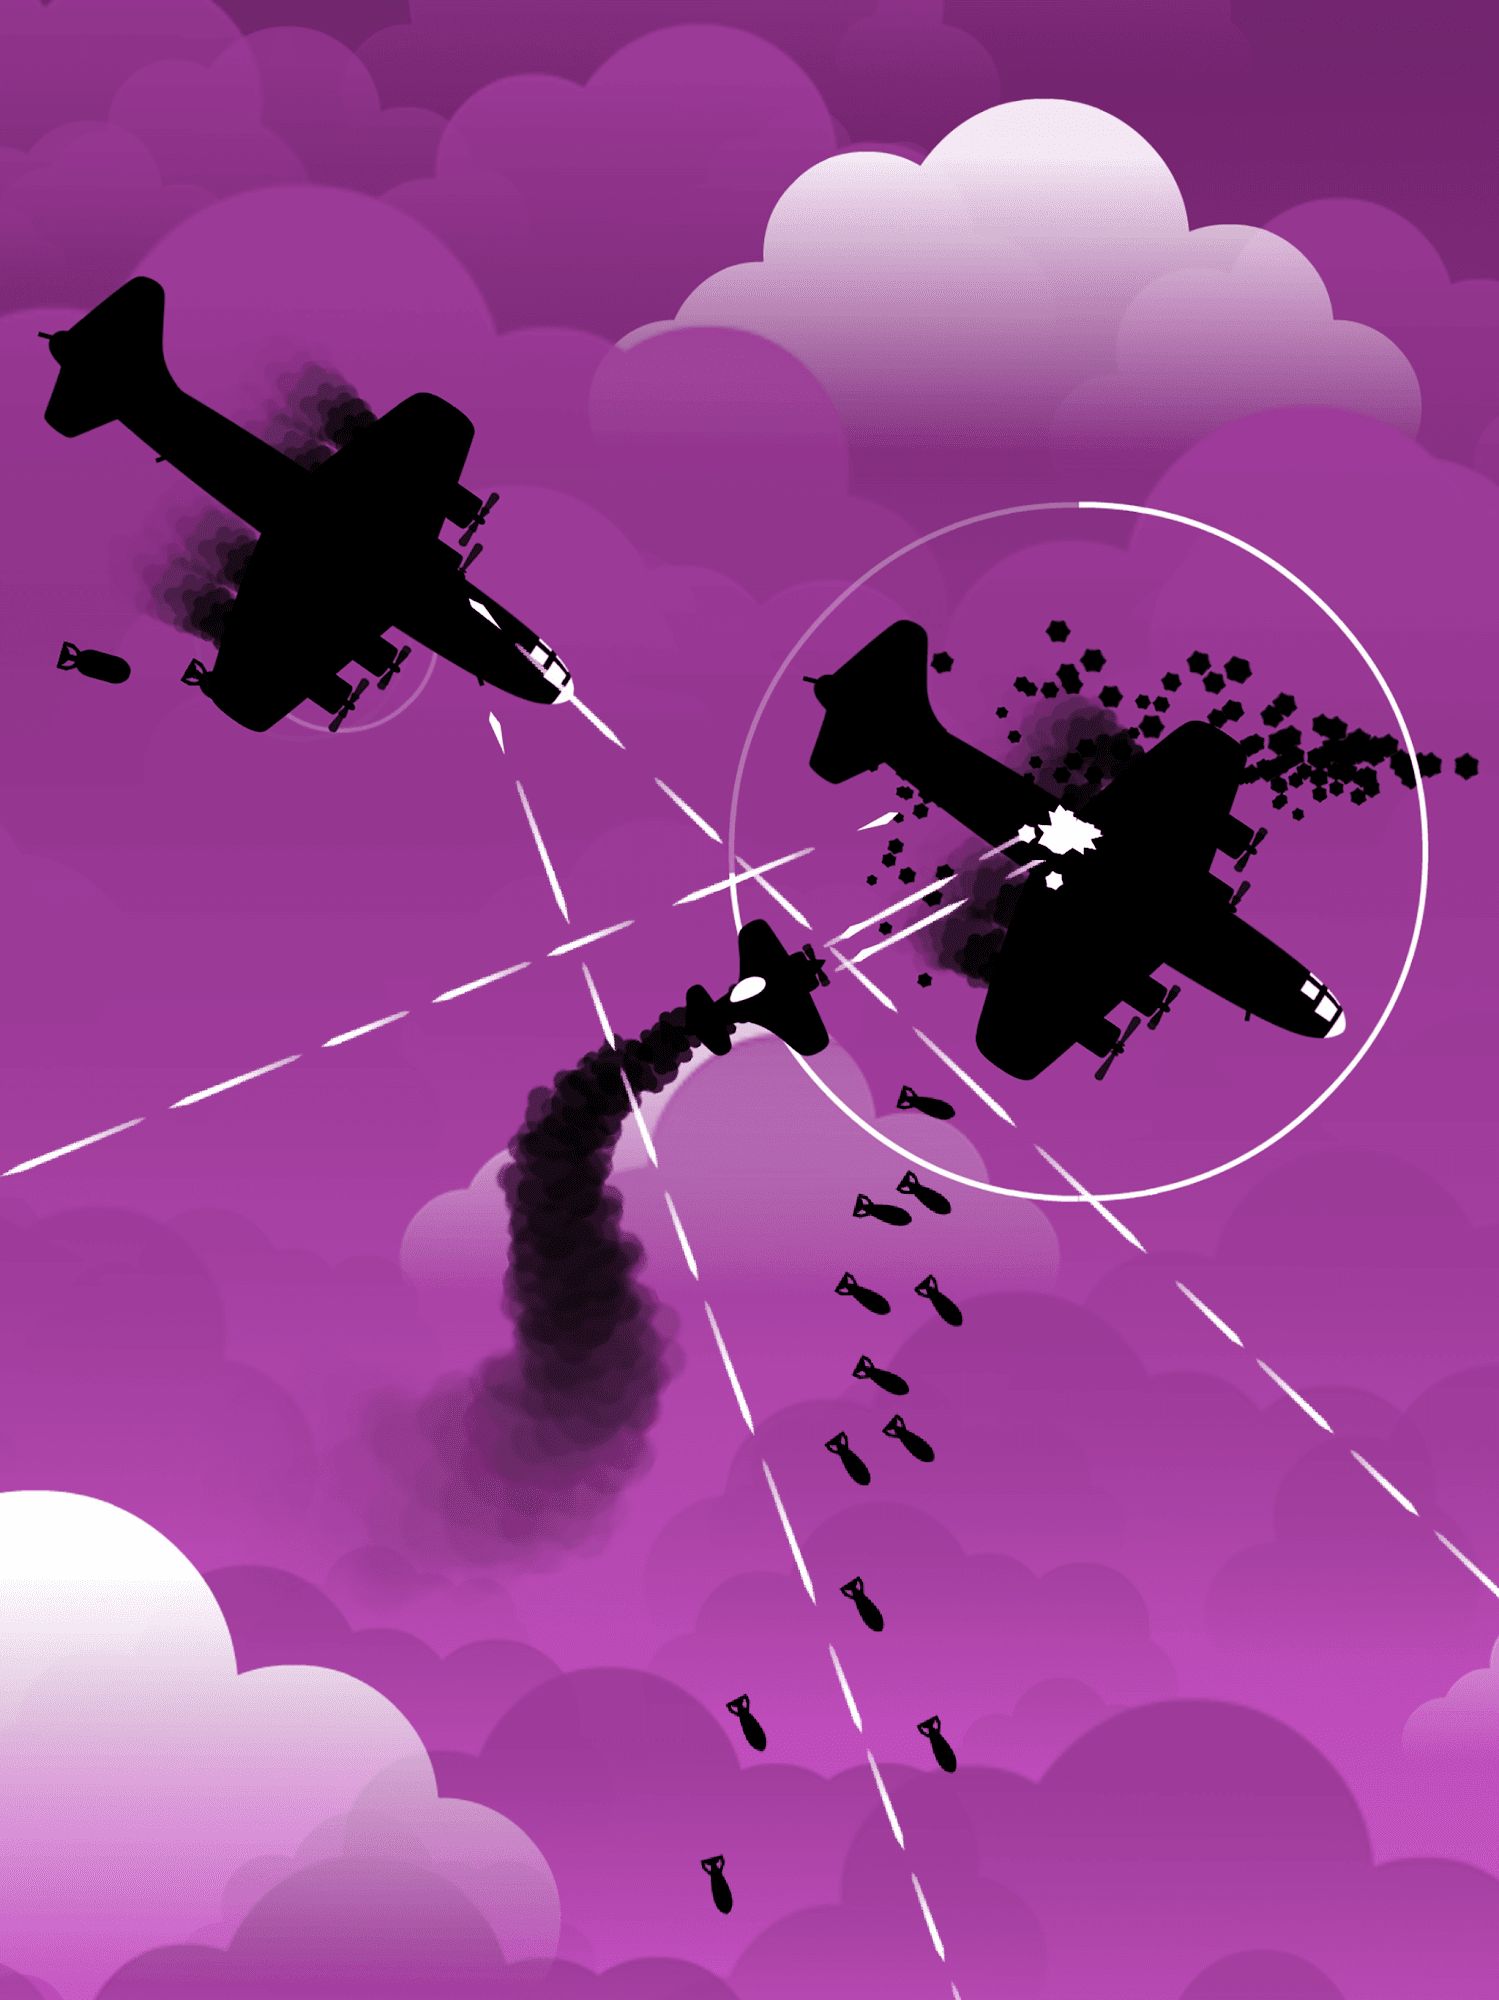 Flying Flogger - Android game screenshots.